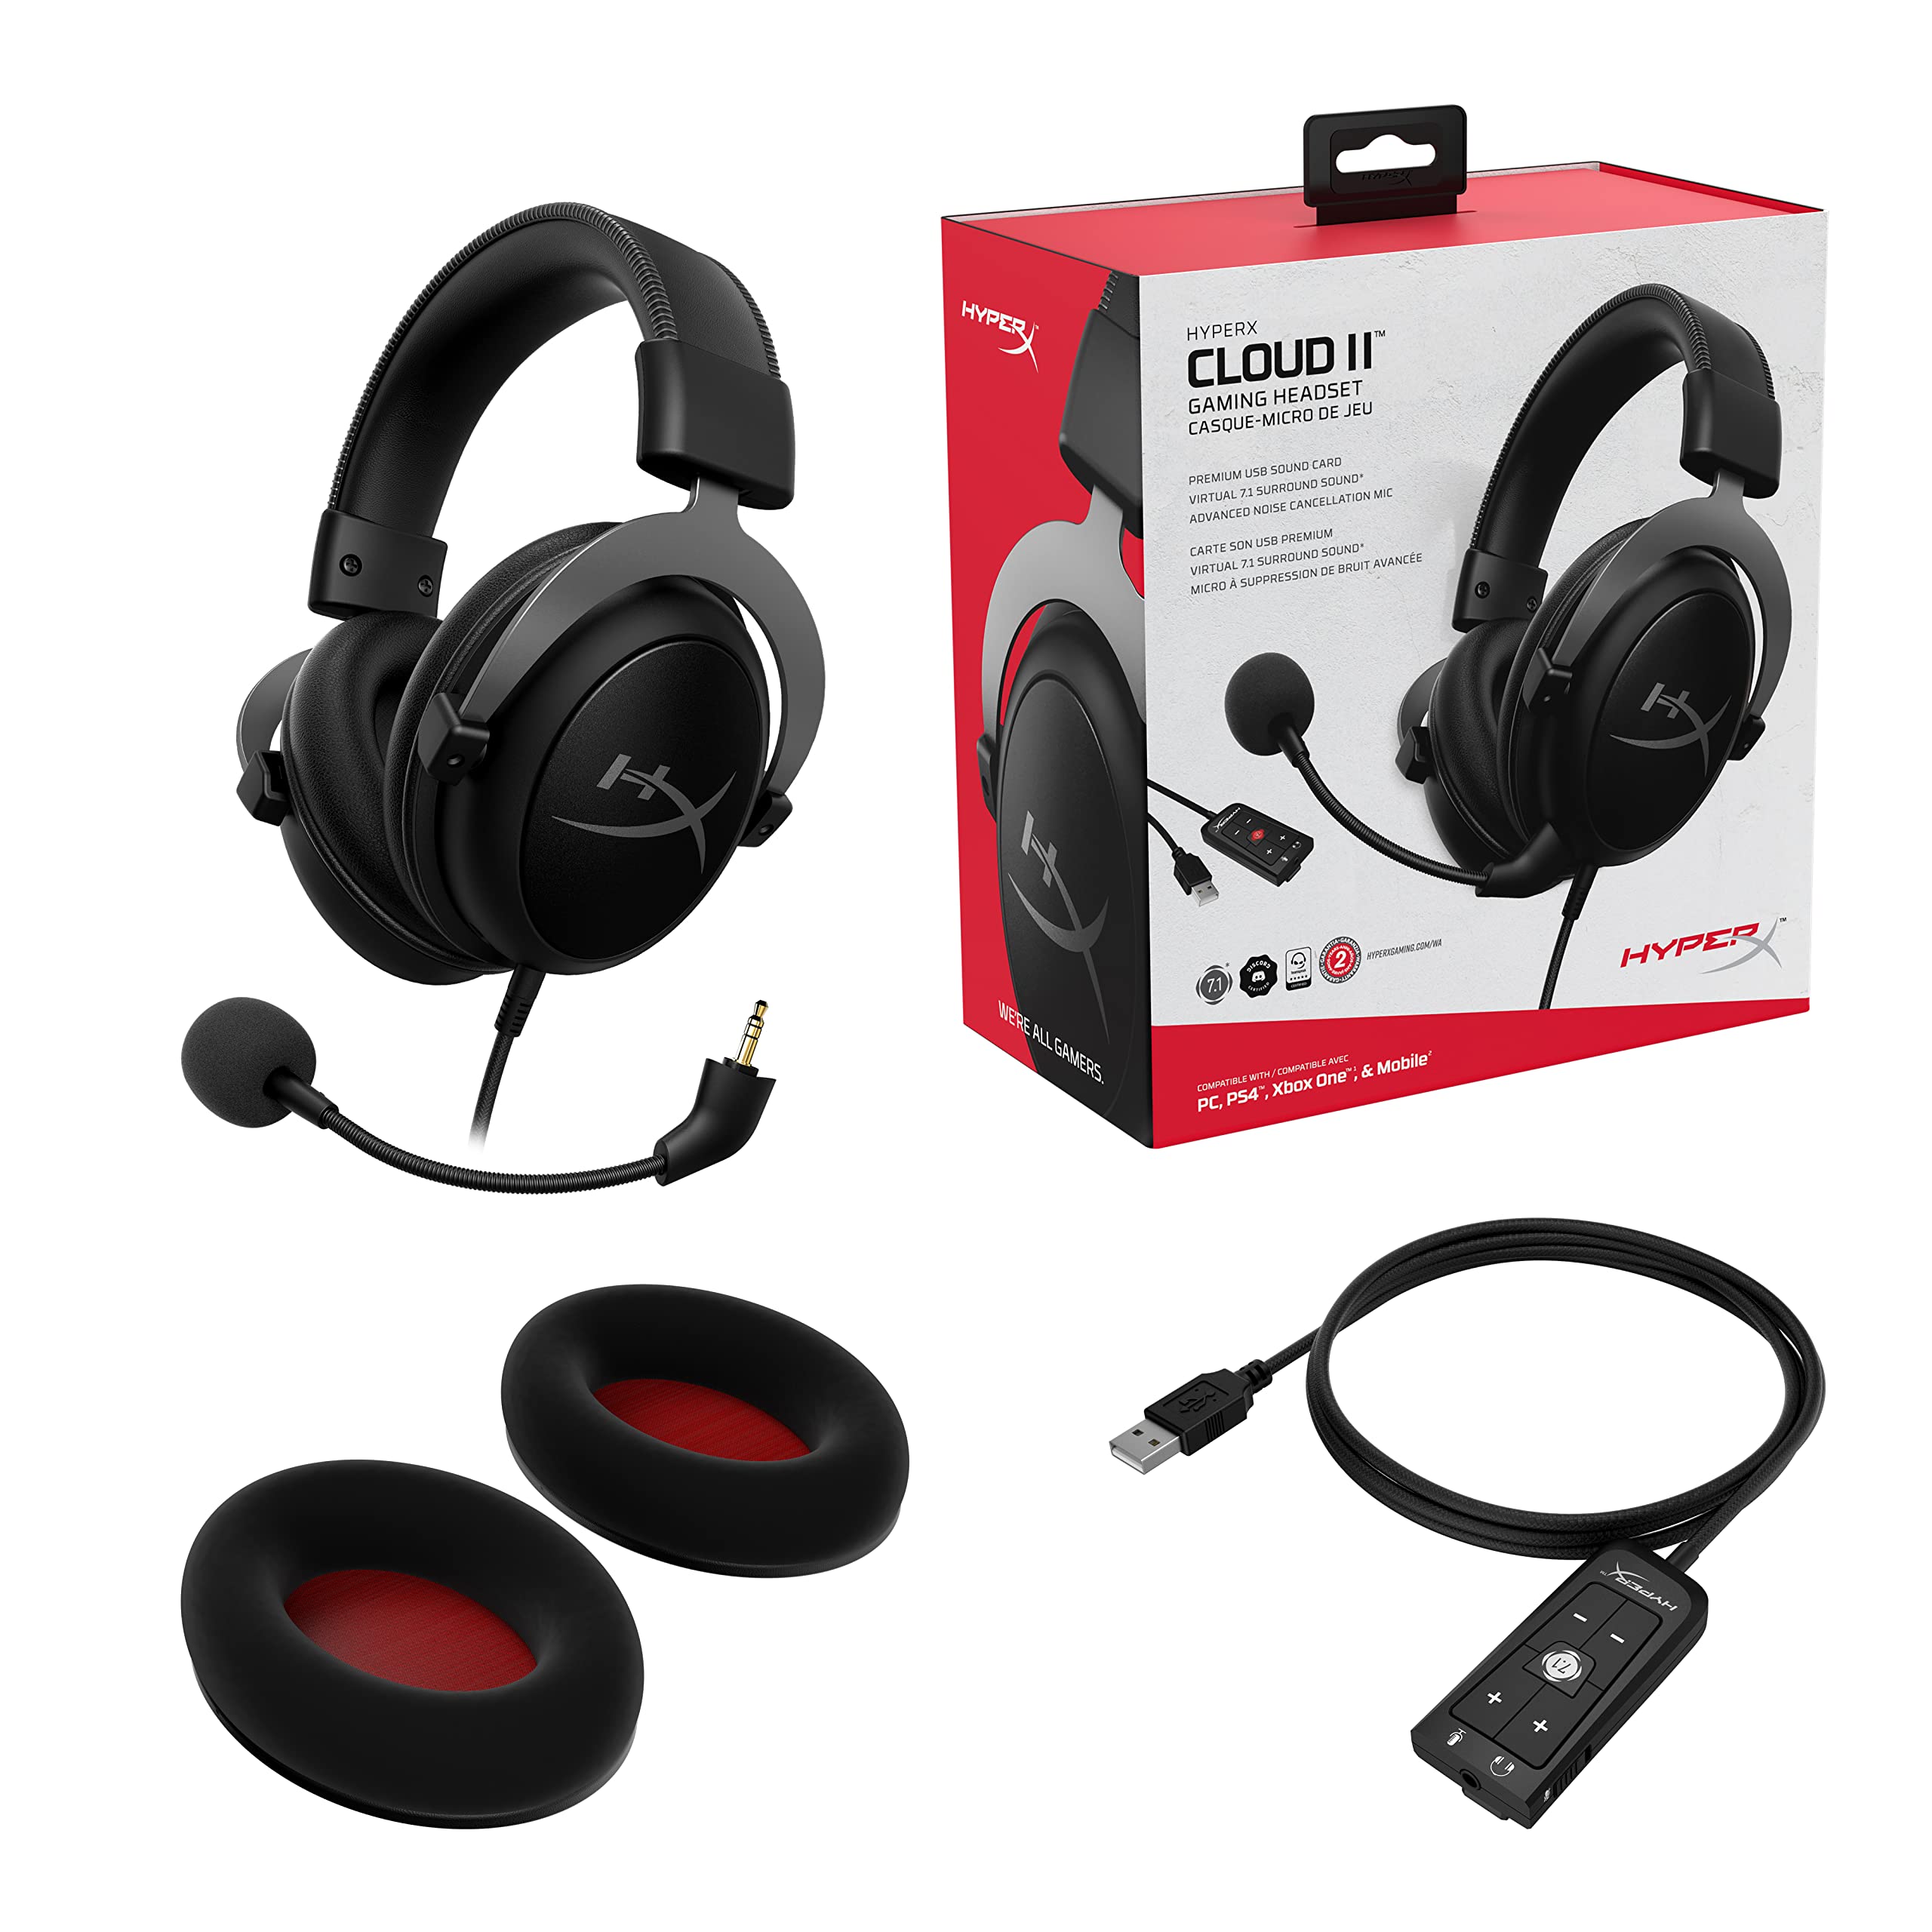 HyperX Cloud II Gaming Headset - 7.1 Surround Sound - Memory Foam Ear Pads - Durable Aluminum Frame - Works with PC, PS4, PS4 PRO, Xbox One, Xbox One S - Gun Metal (KHX-HSCP-GM)